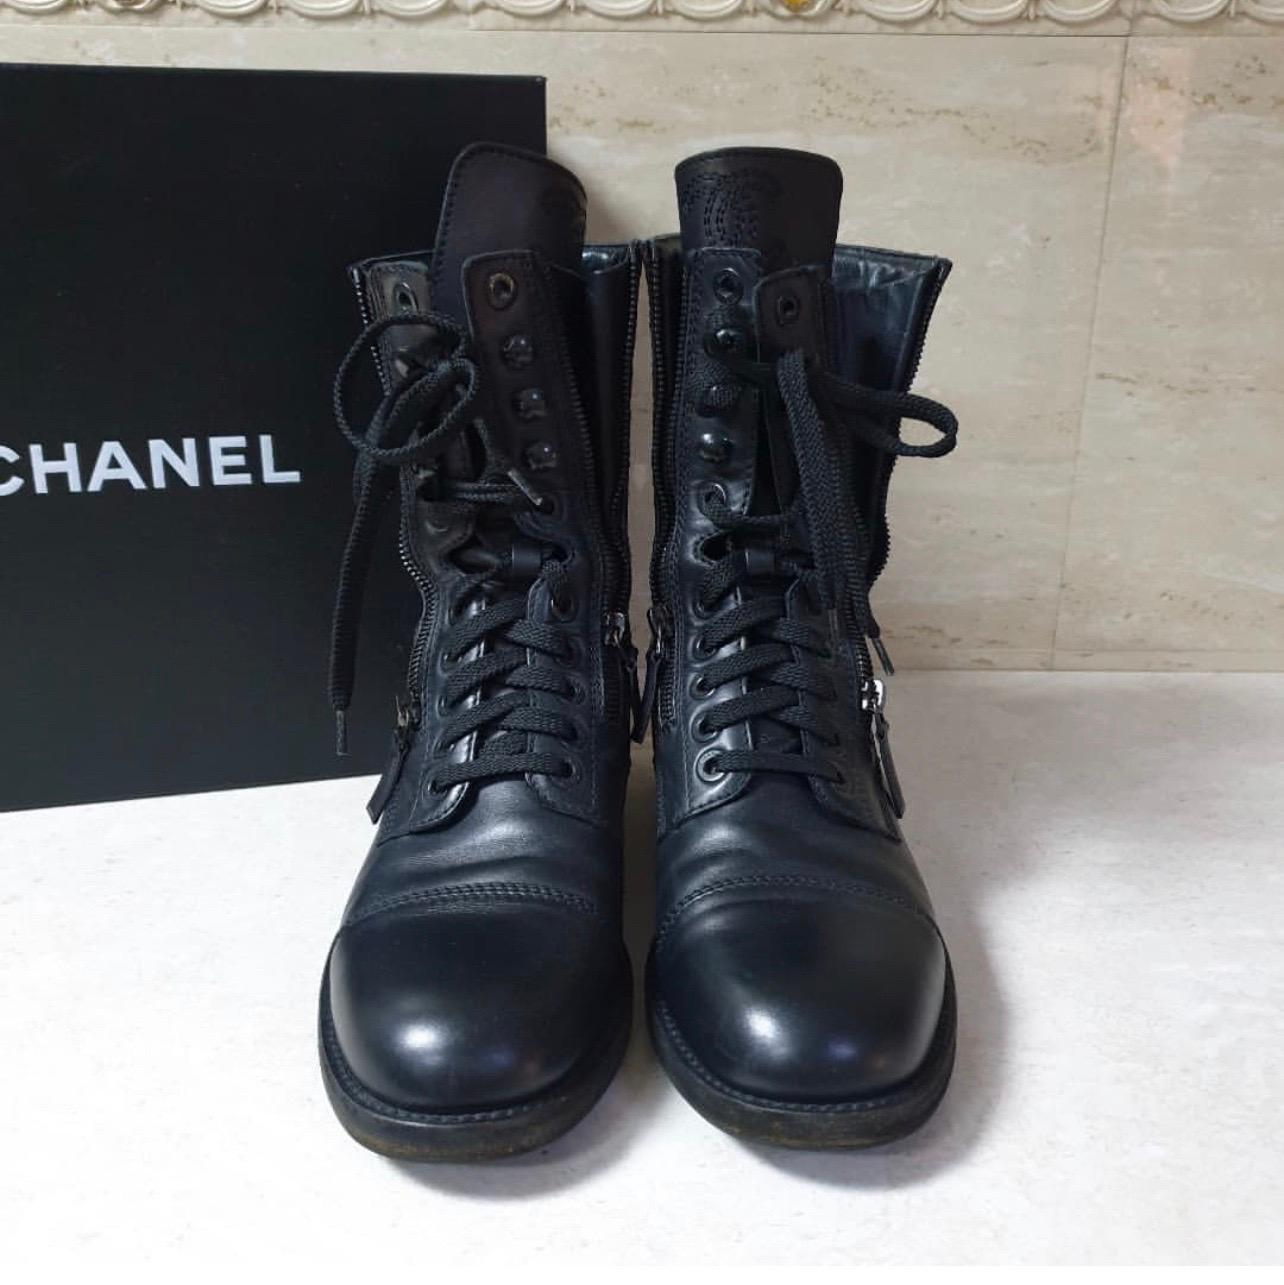 CHANEL Leather Mid-Calf Combat Boots
Black
Round-Toes
Block Heels
Lace-Up Closure at Uppers
Sz.40
Very good condition.
No original pachaging.